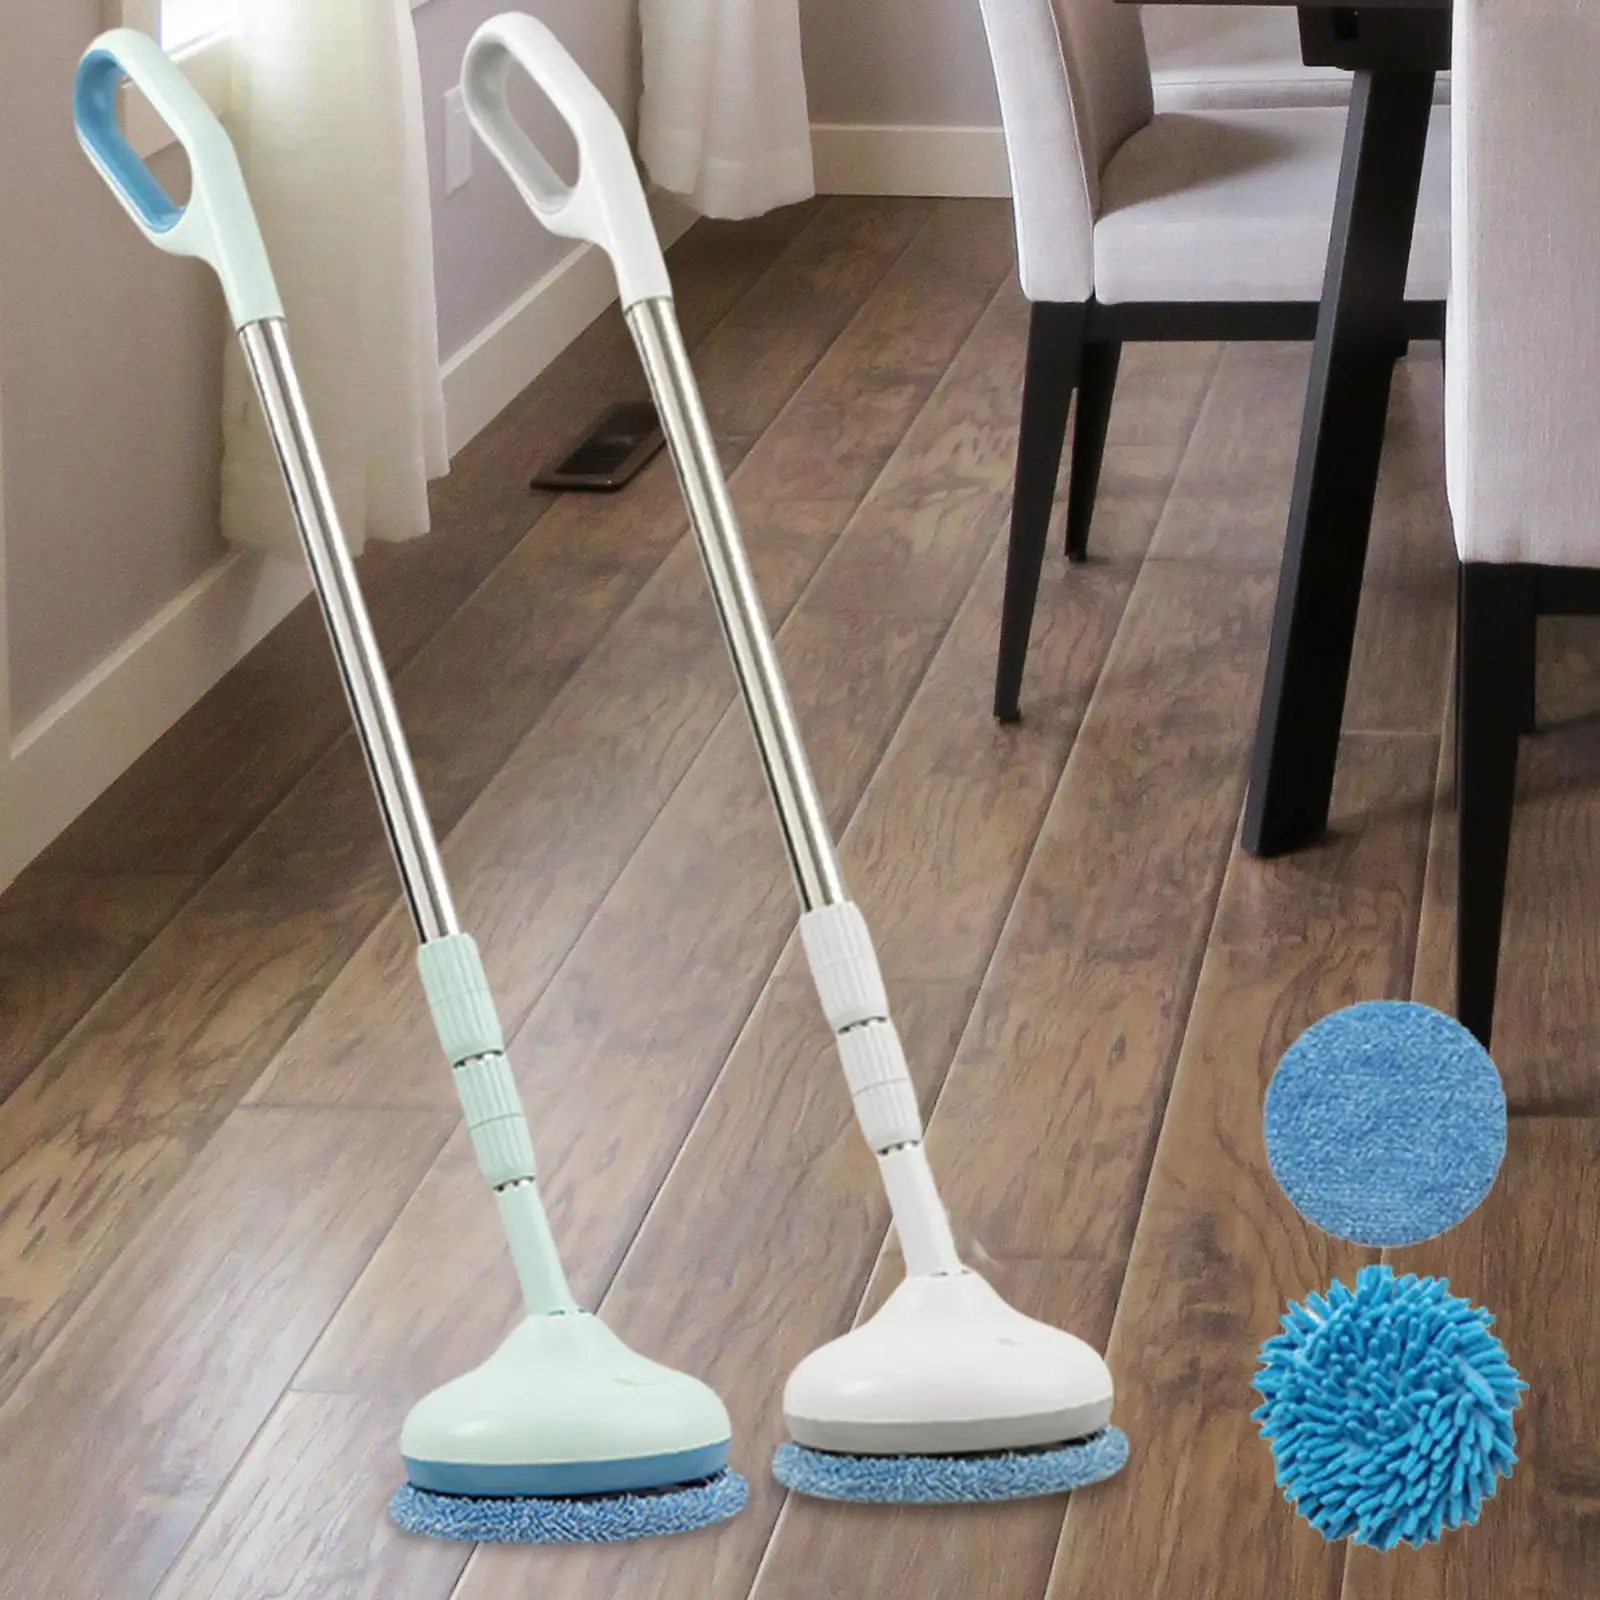 Rotatable Electric Window Cleaner Floor Cleaner Mop with Long Handle Car Washing Artifact for Marble Flooring Glass Bathroom